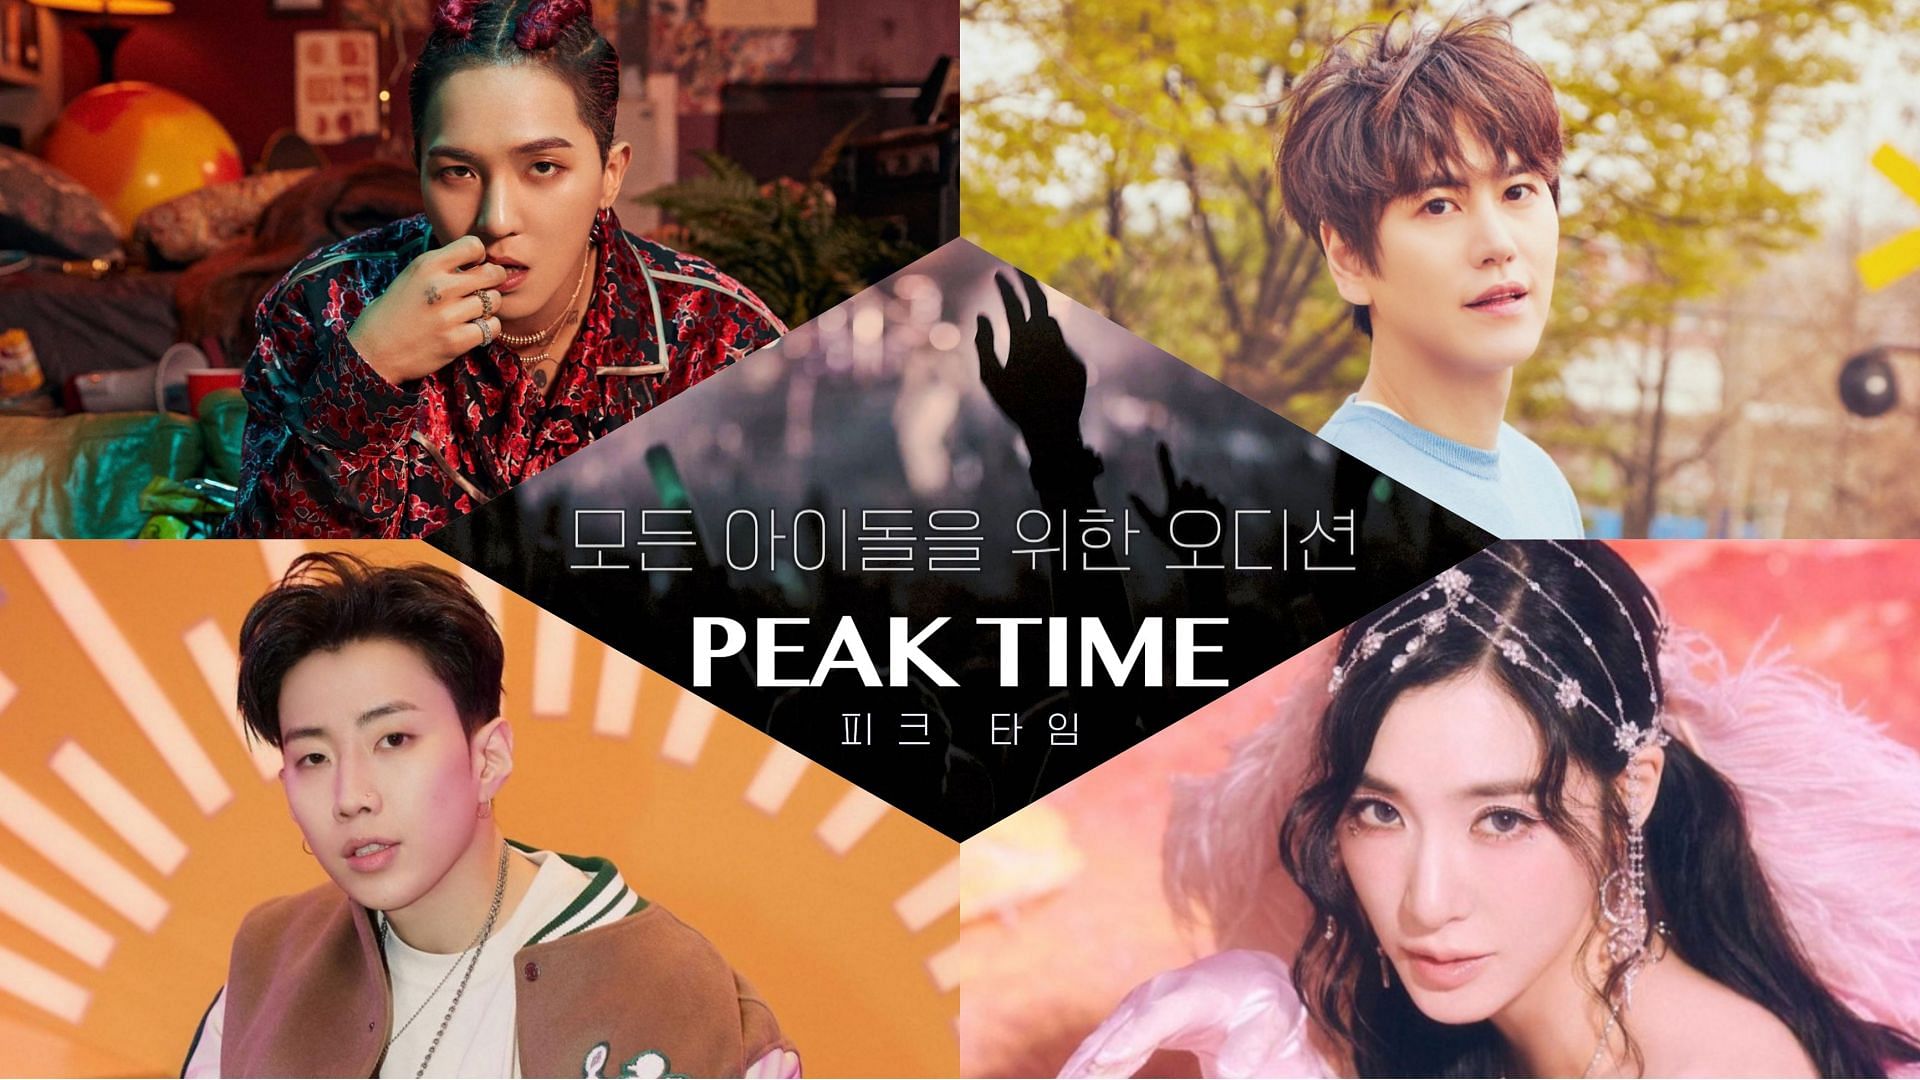 Peak Time judges Mino, Jay Park, Kyuhyun and Tiffany Young (Images via Official Instagram and Twitter)